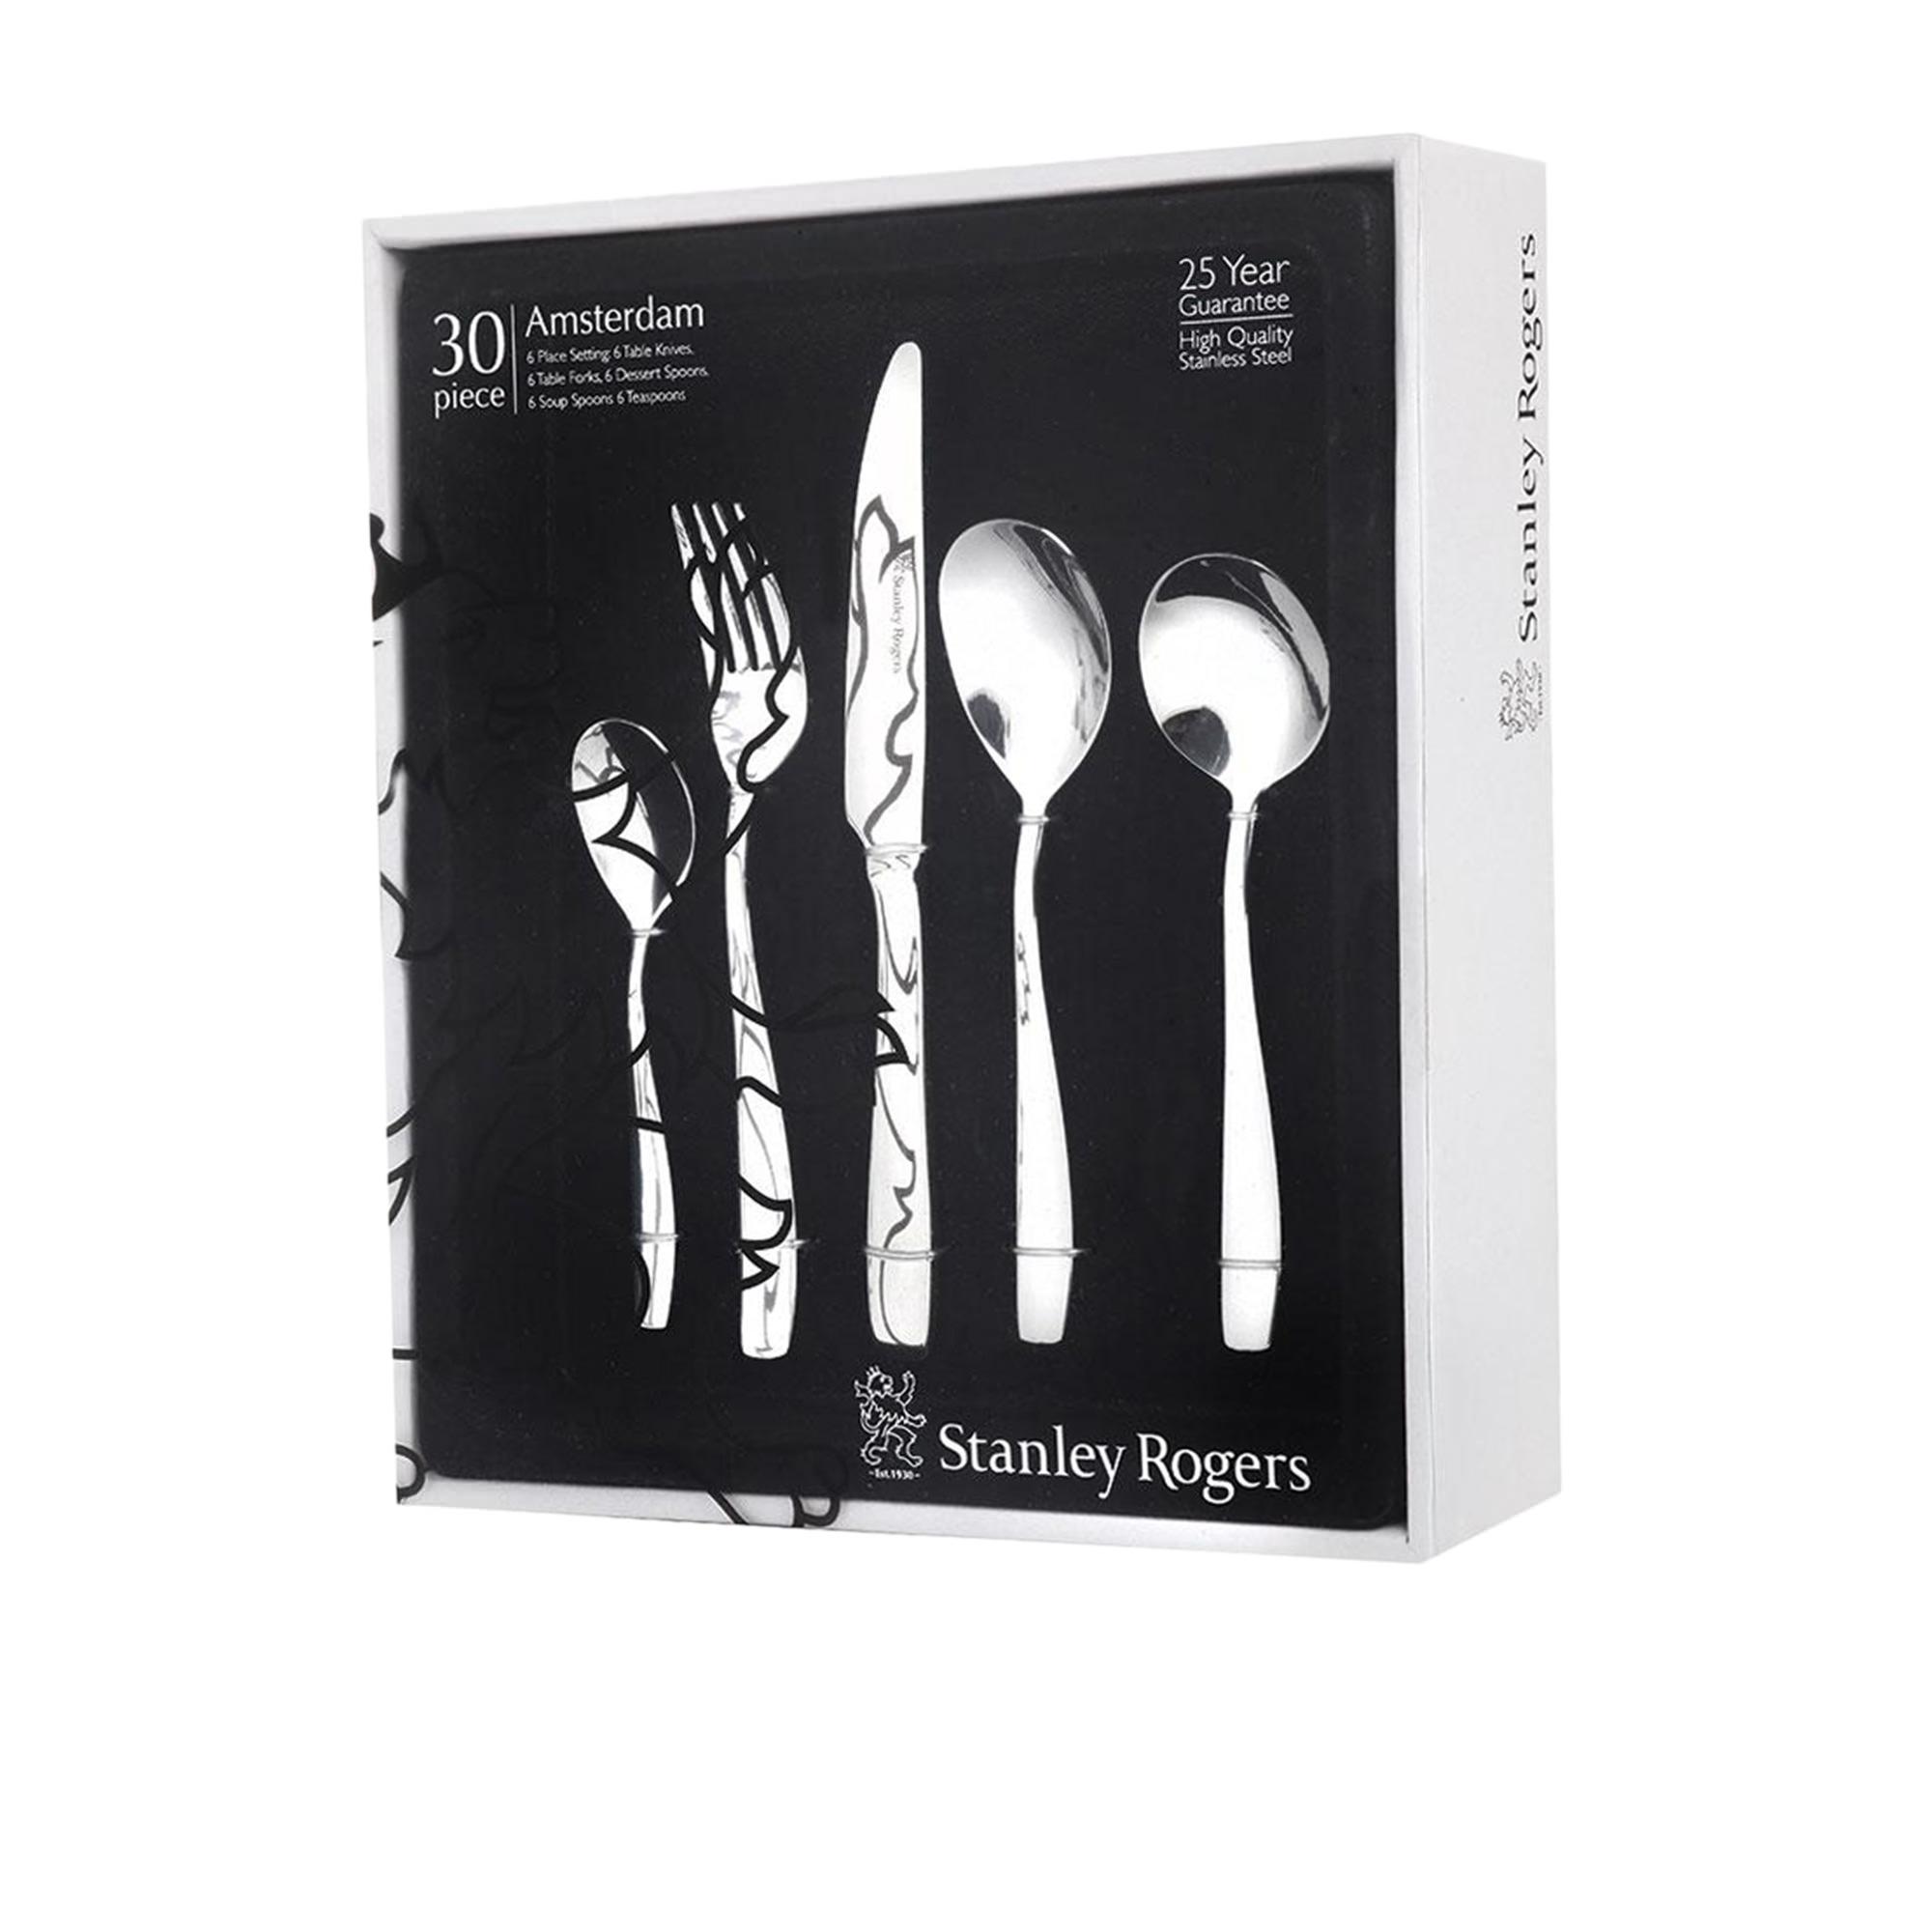 Stanley Rogers Amsterdam Cutlery Set 30pc Image 3